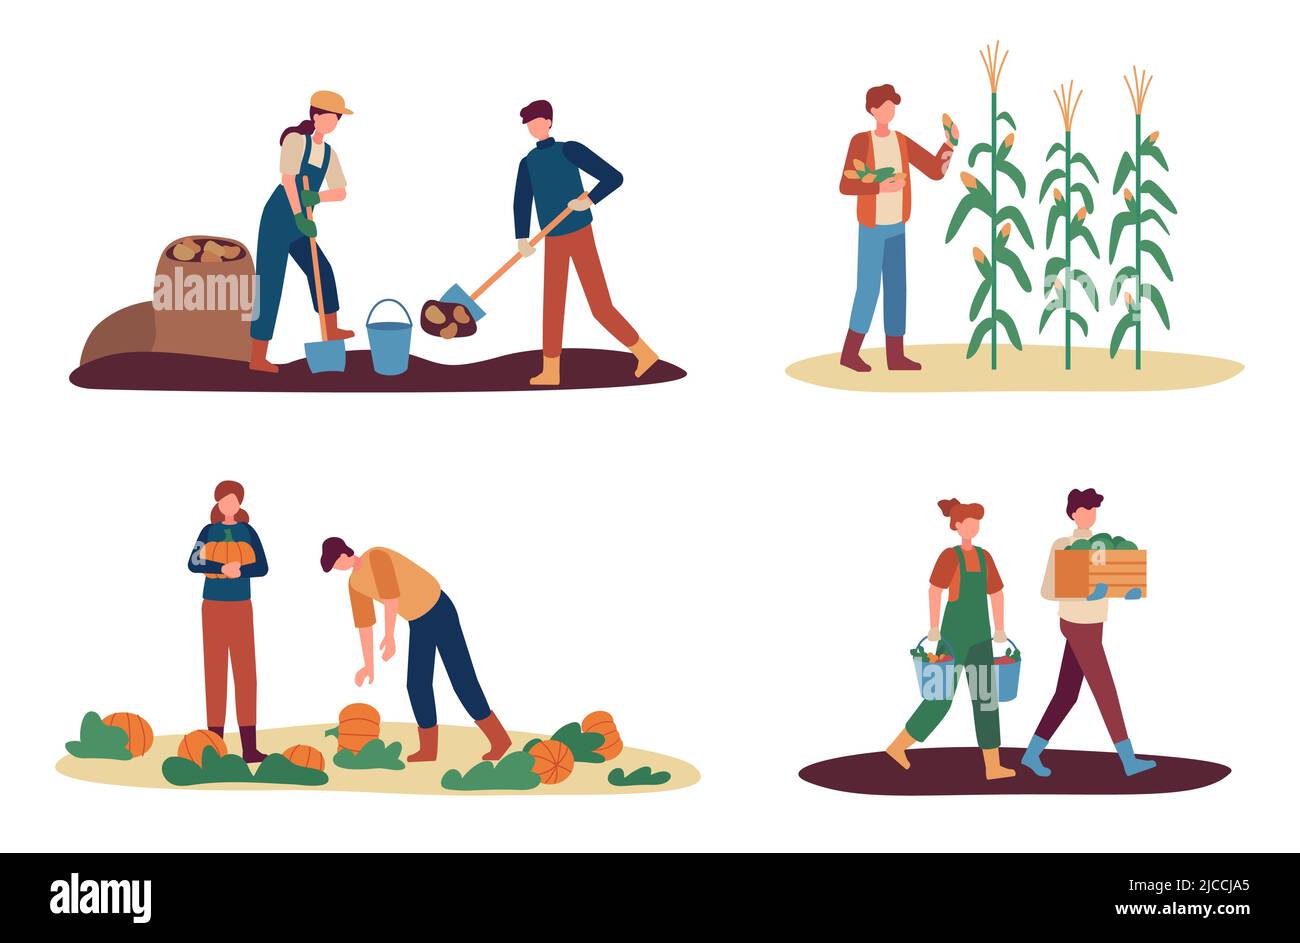 Autumn harvest. Female and male farm workers gathering crops. Man digging up potato, collecting corn. Couple picking up pumpkins Stock Vector